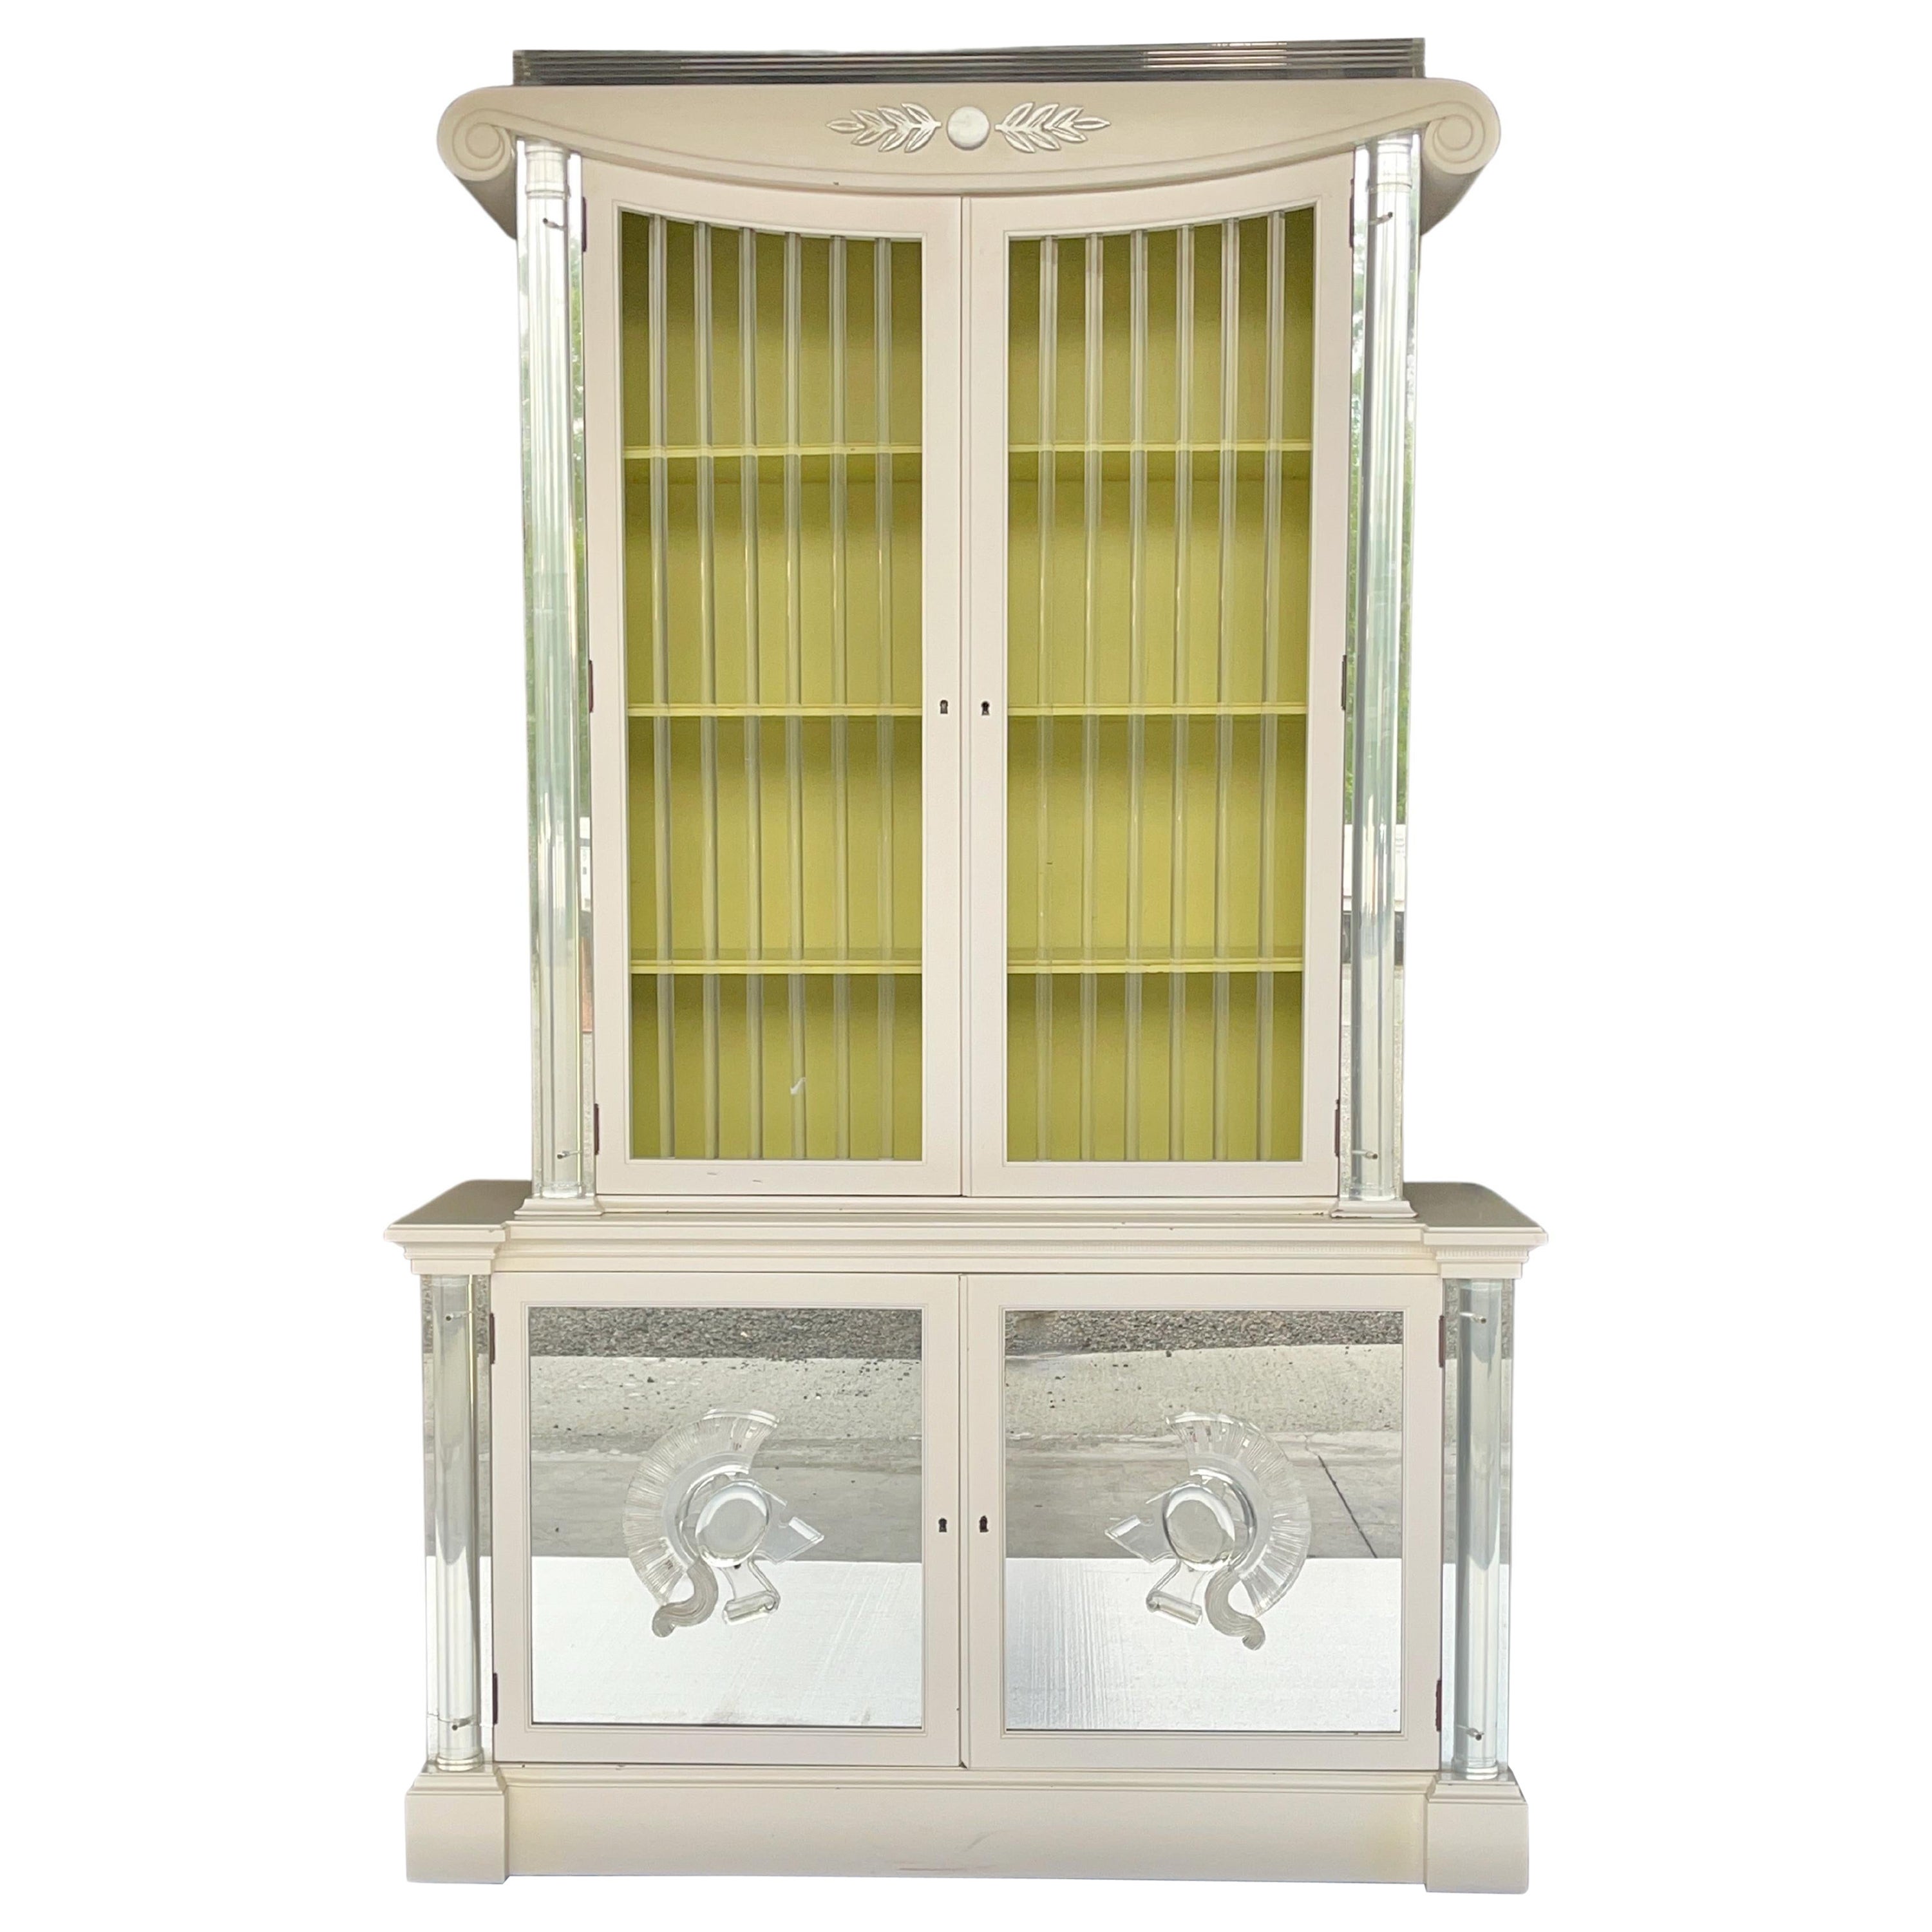 Lorin Jackson "Glassic" Cabinet by Grosfeld House For Sale